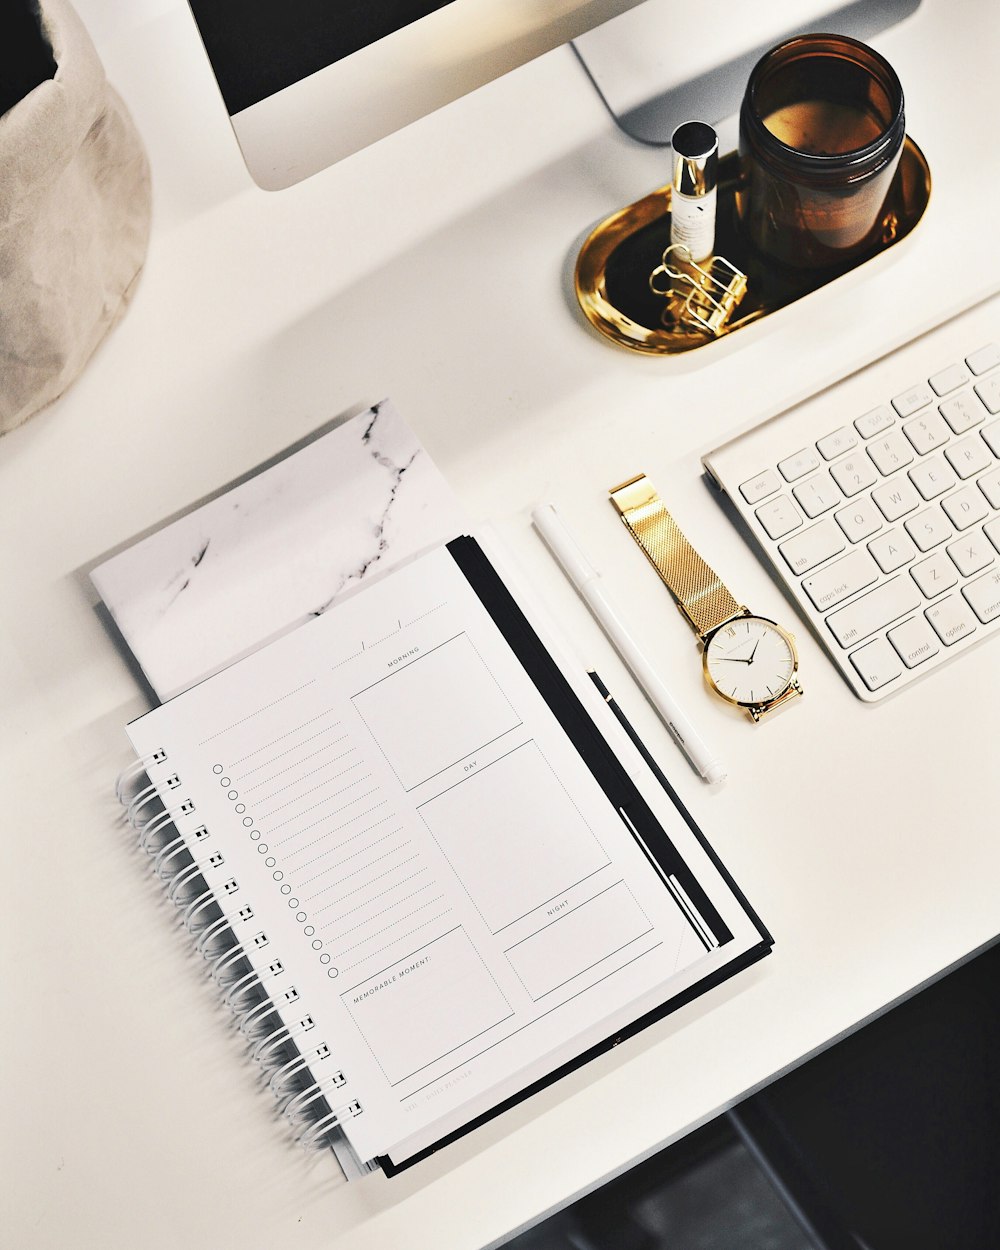 A flatlay image of a desk with a keyboard, gold watch, notebook and more.